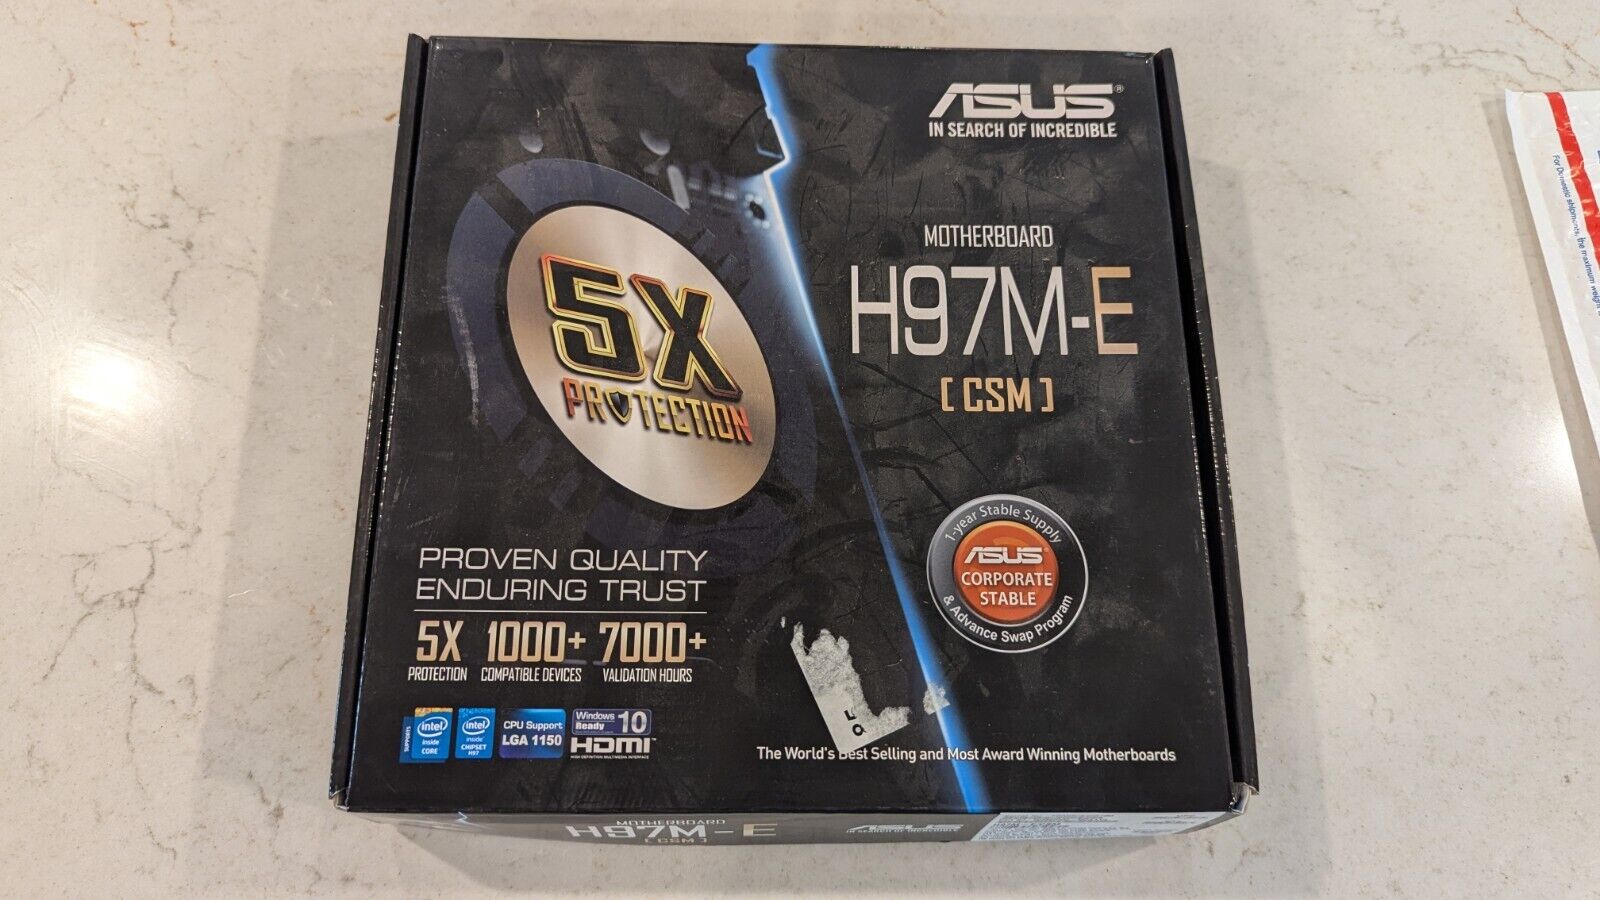 ASUS H97M-E * i5 4670 CPU * 8GB RAM Motherboard Combo w/ IO Shield and Packaging